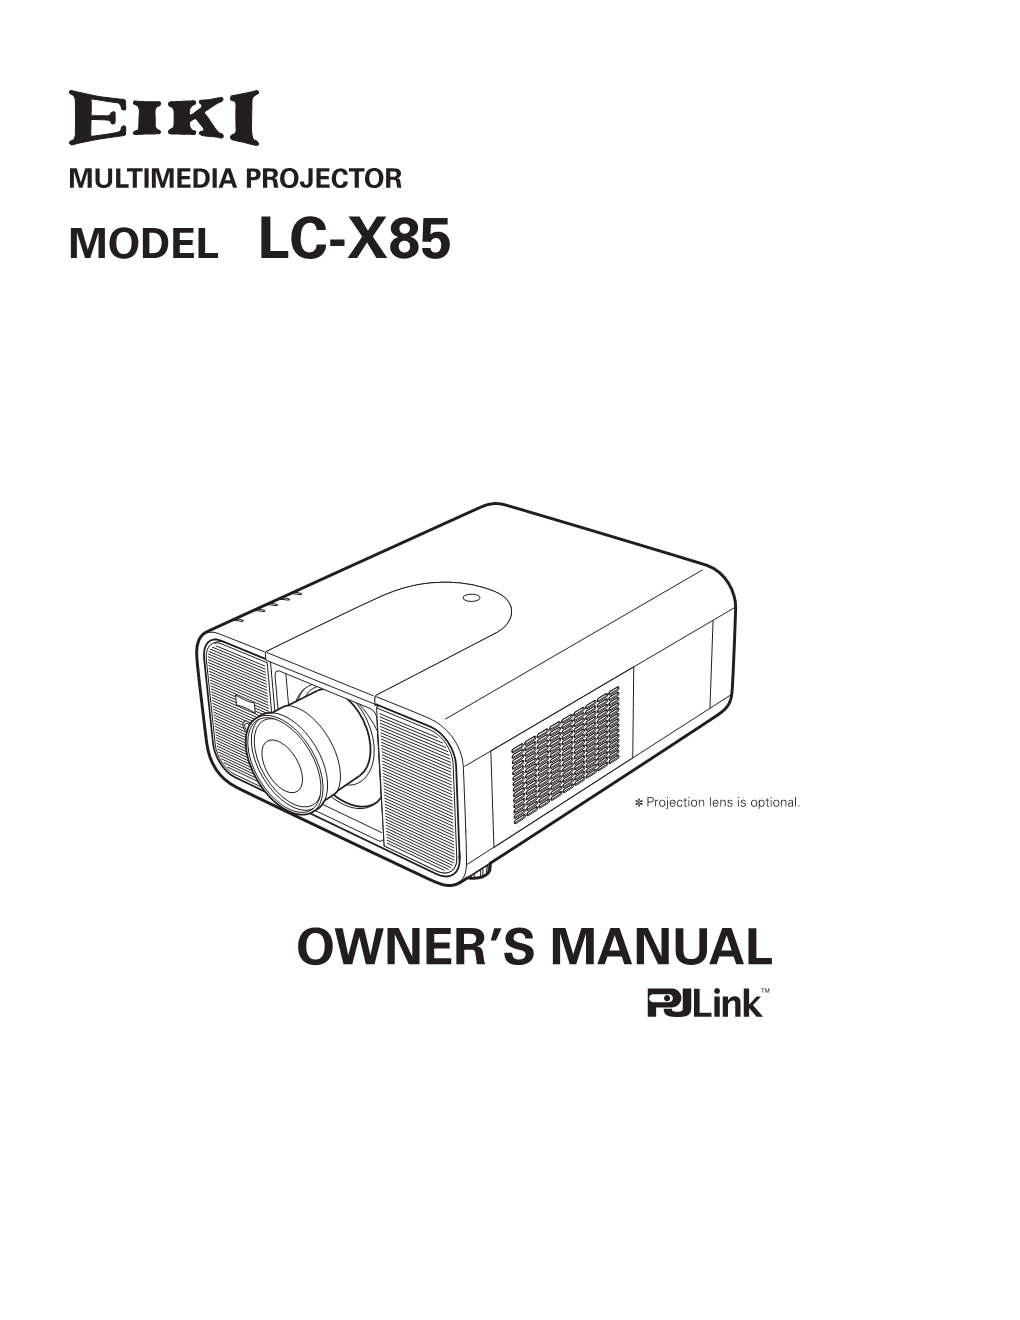 Owner's Manual with This Unit